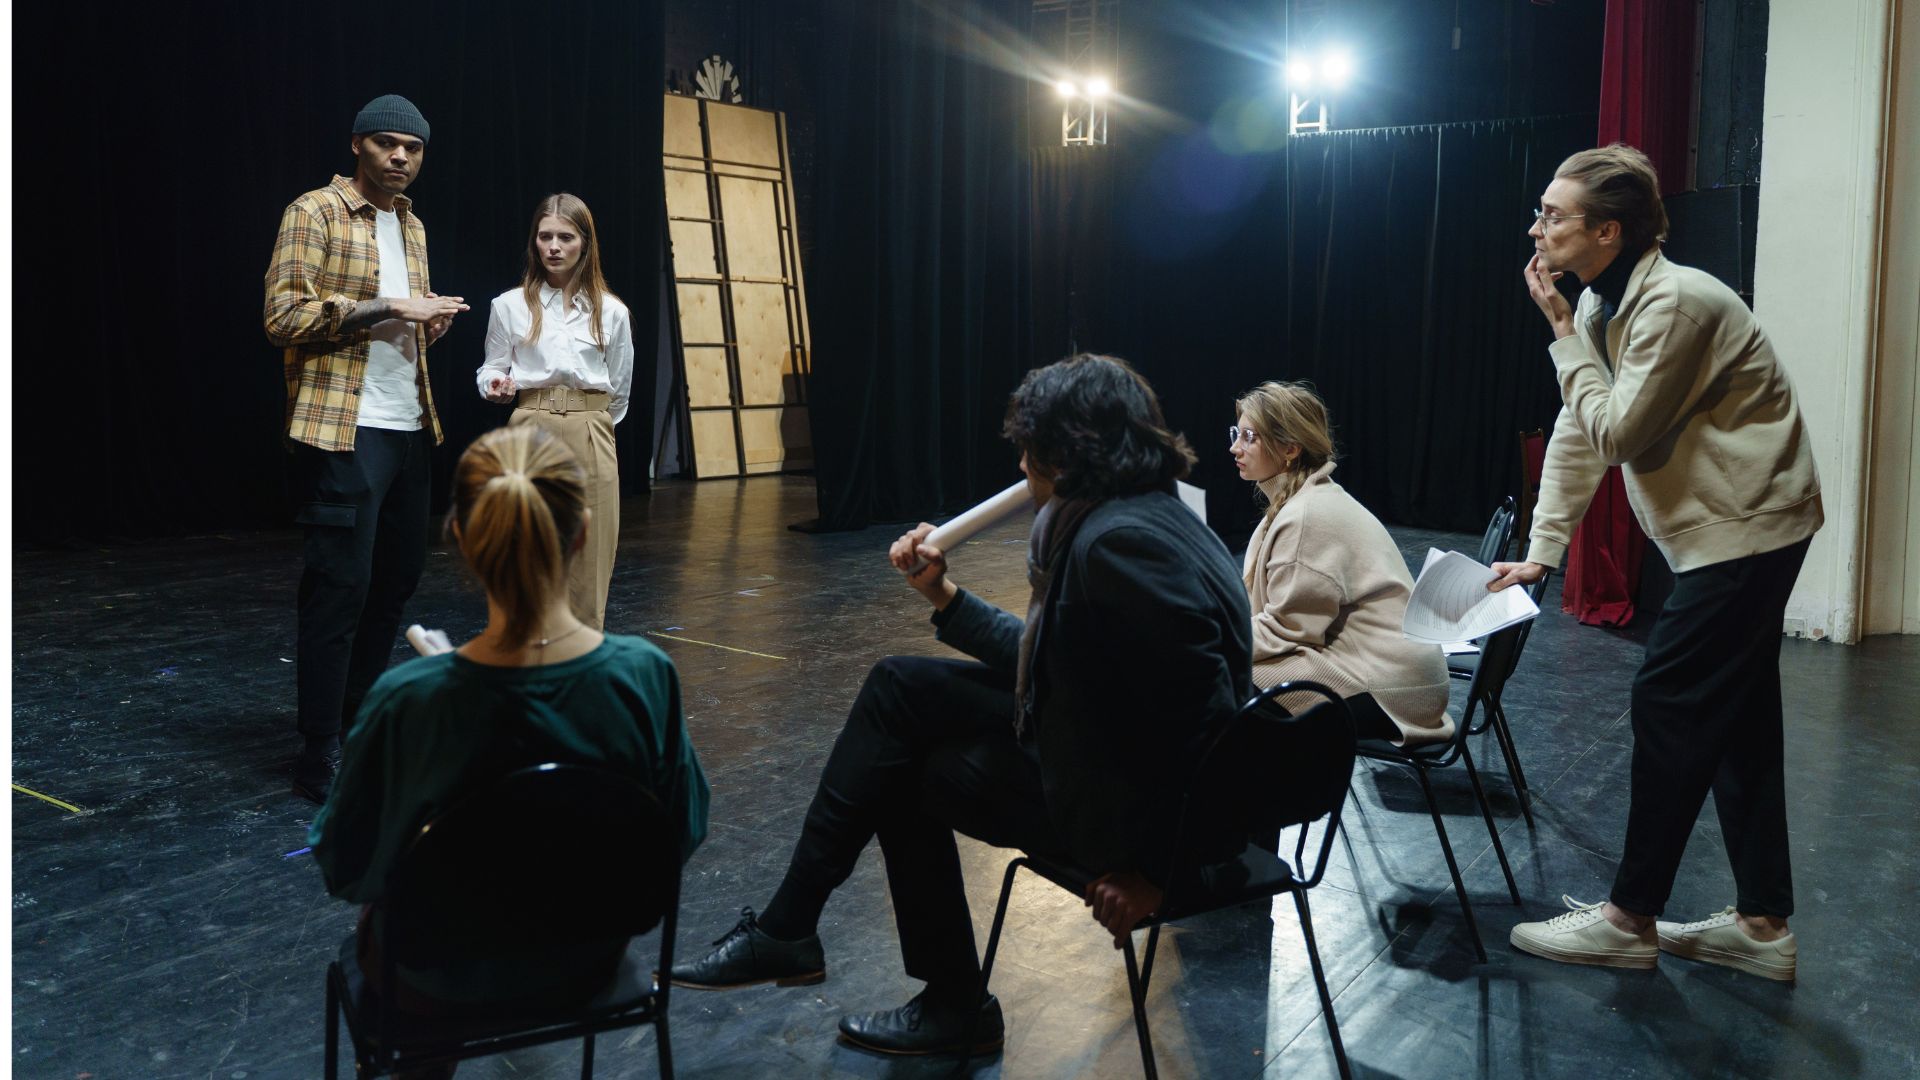 image showing a casting director sitting in a theater speaking with actors and actresses